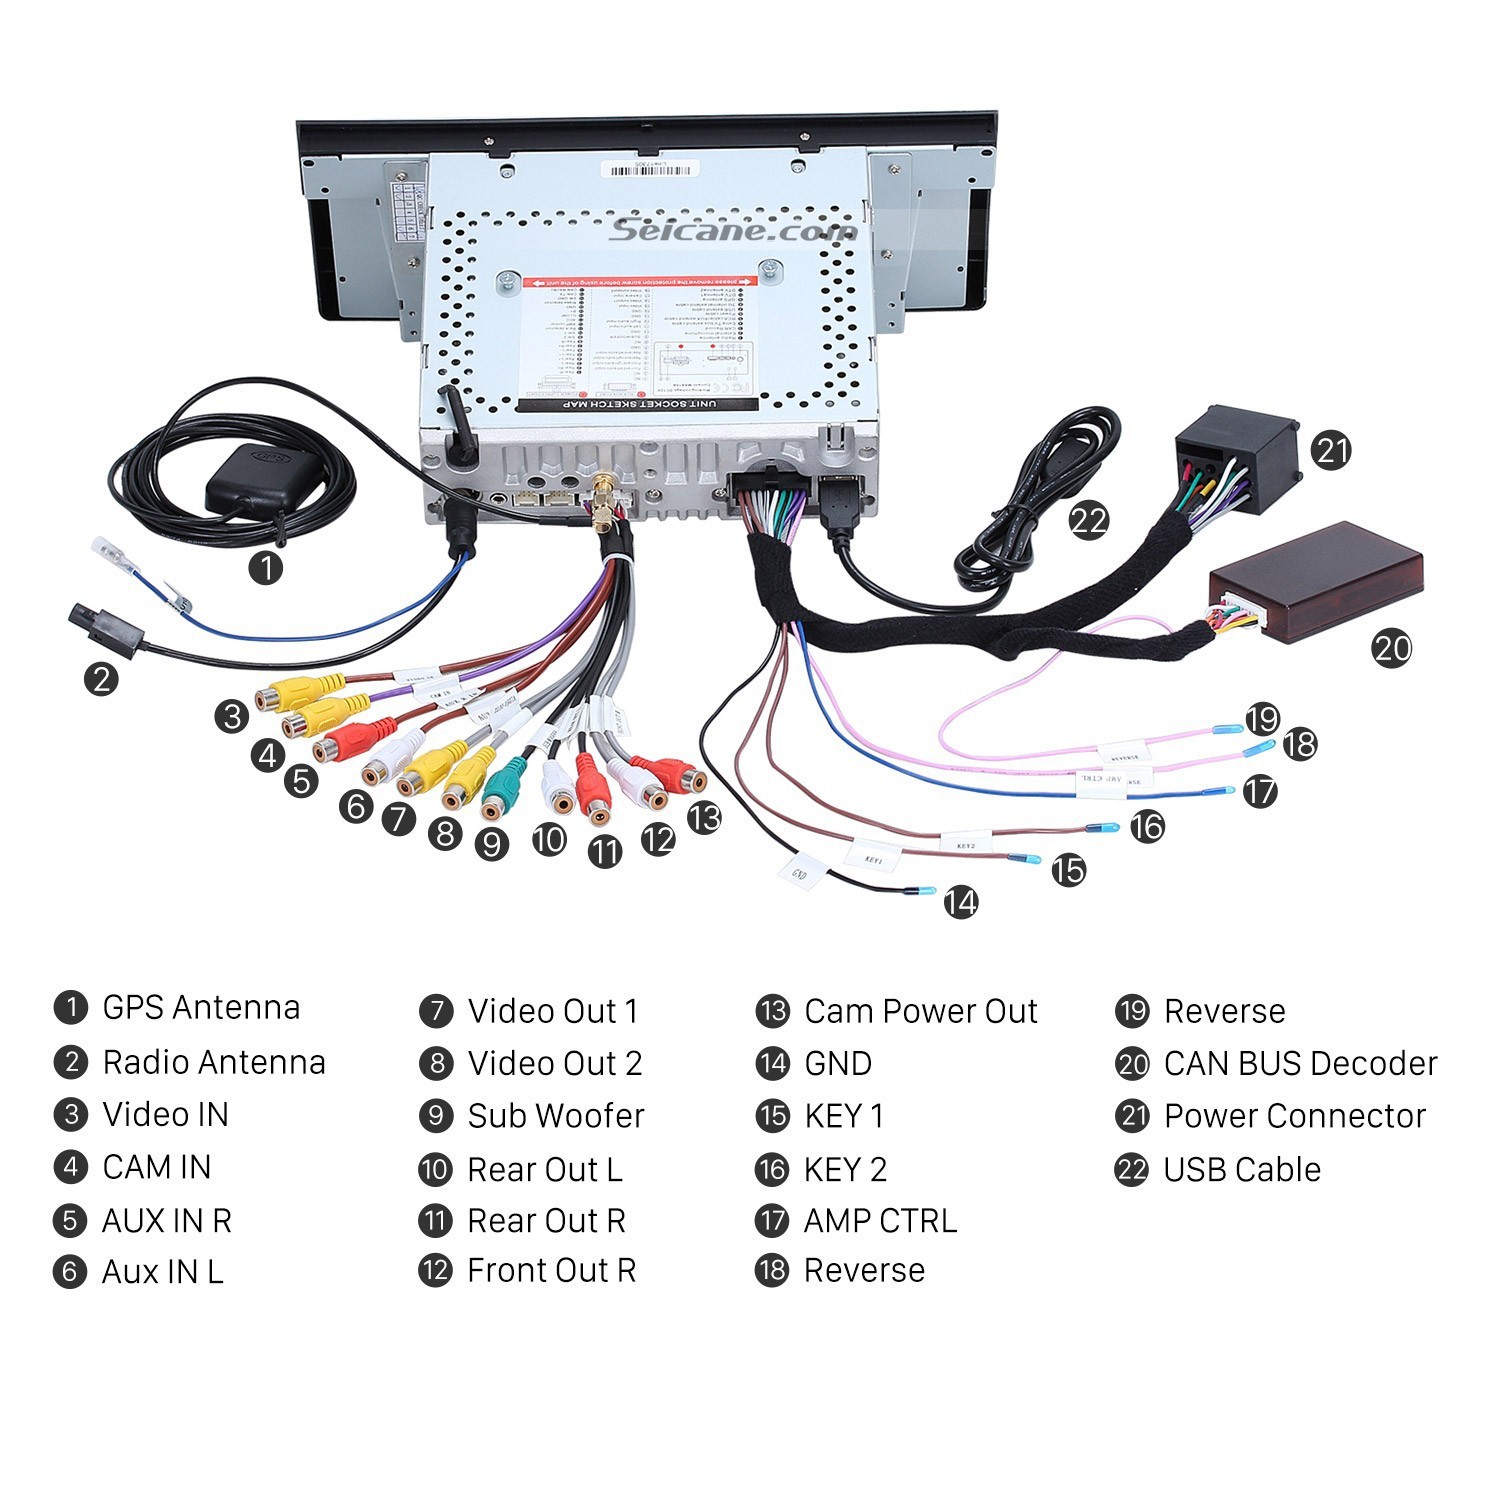 Wiring Diagram for Car Stereo with Amplifier Amplifier Wiring Diagram Inspirational Cheap All In E android 6 0 Of Wiring Diagram for Car Stereo with Amplifier